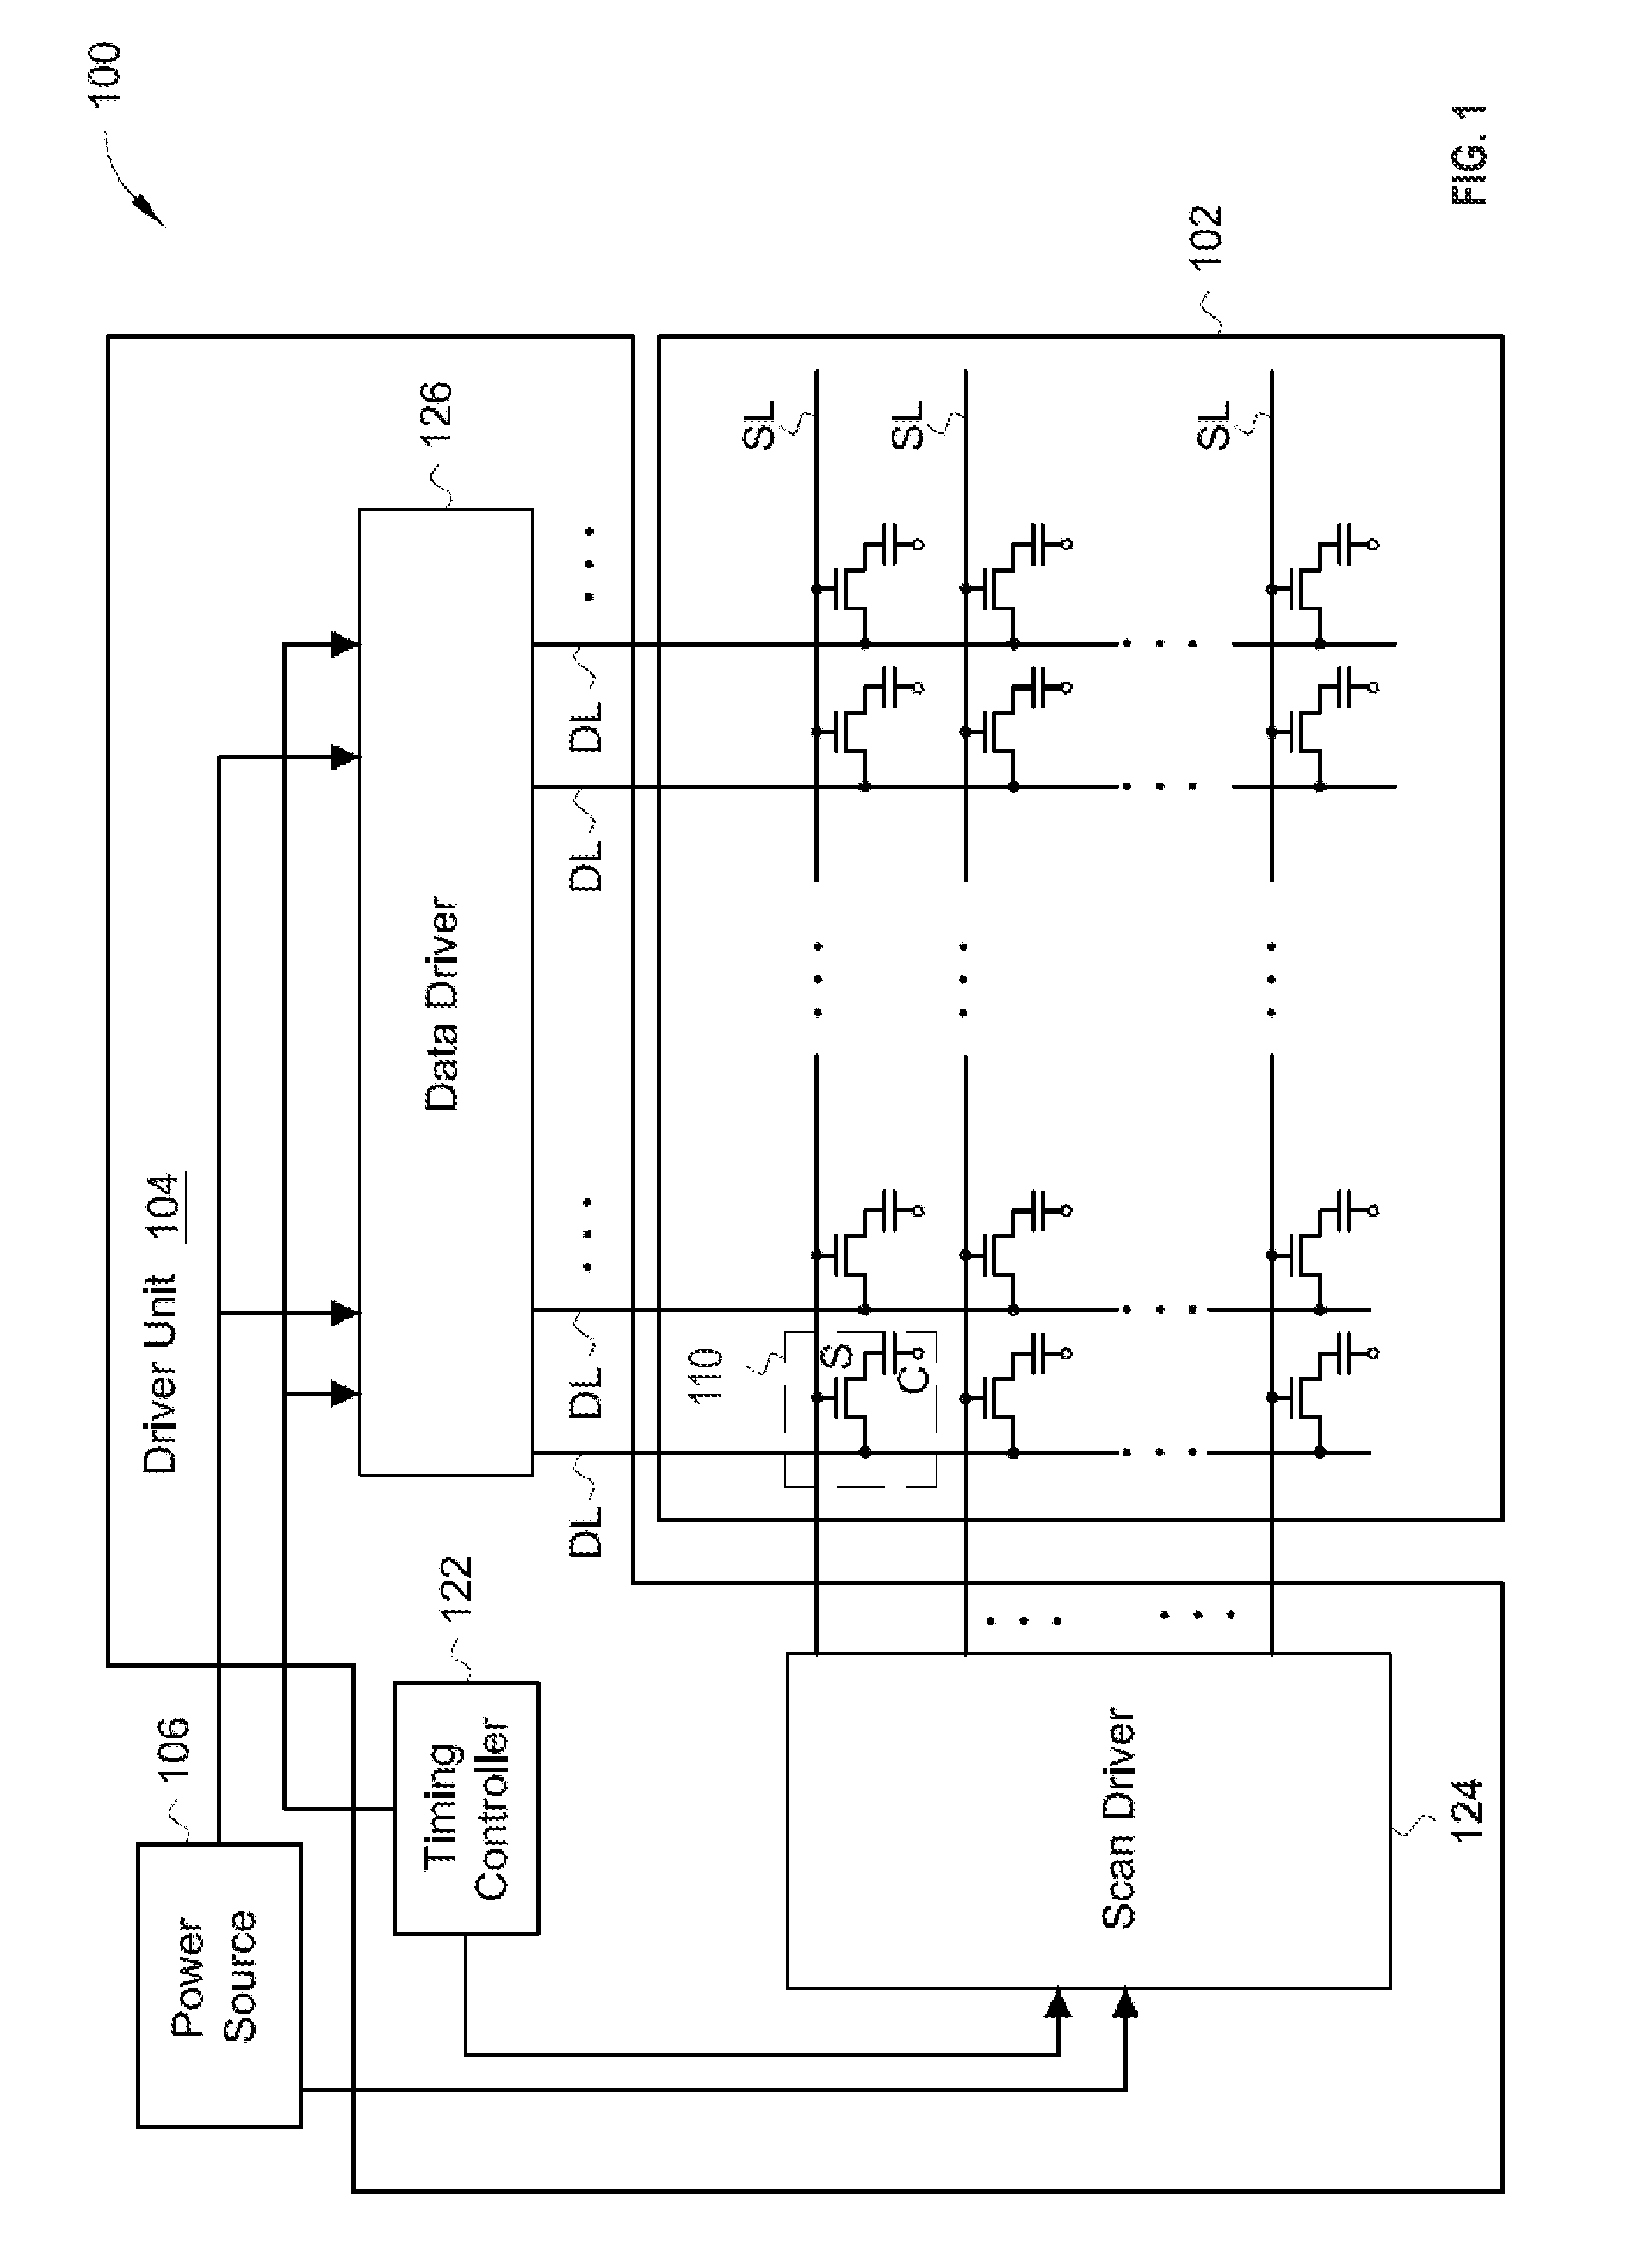 System and method for handling image data transfer in a display driver